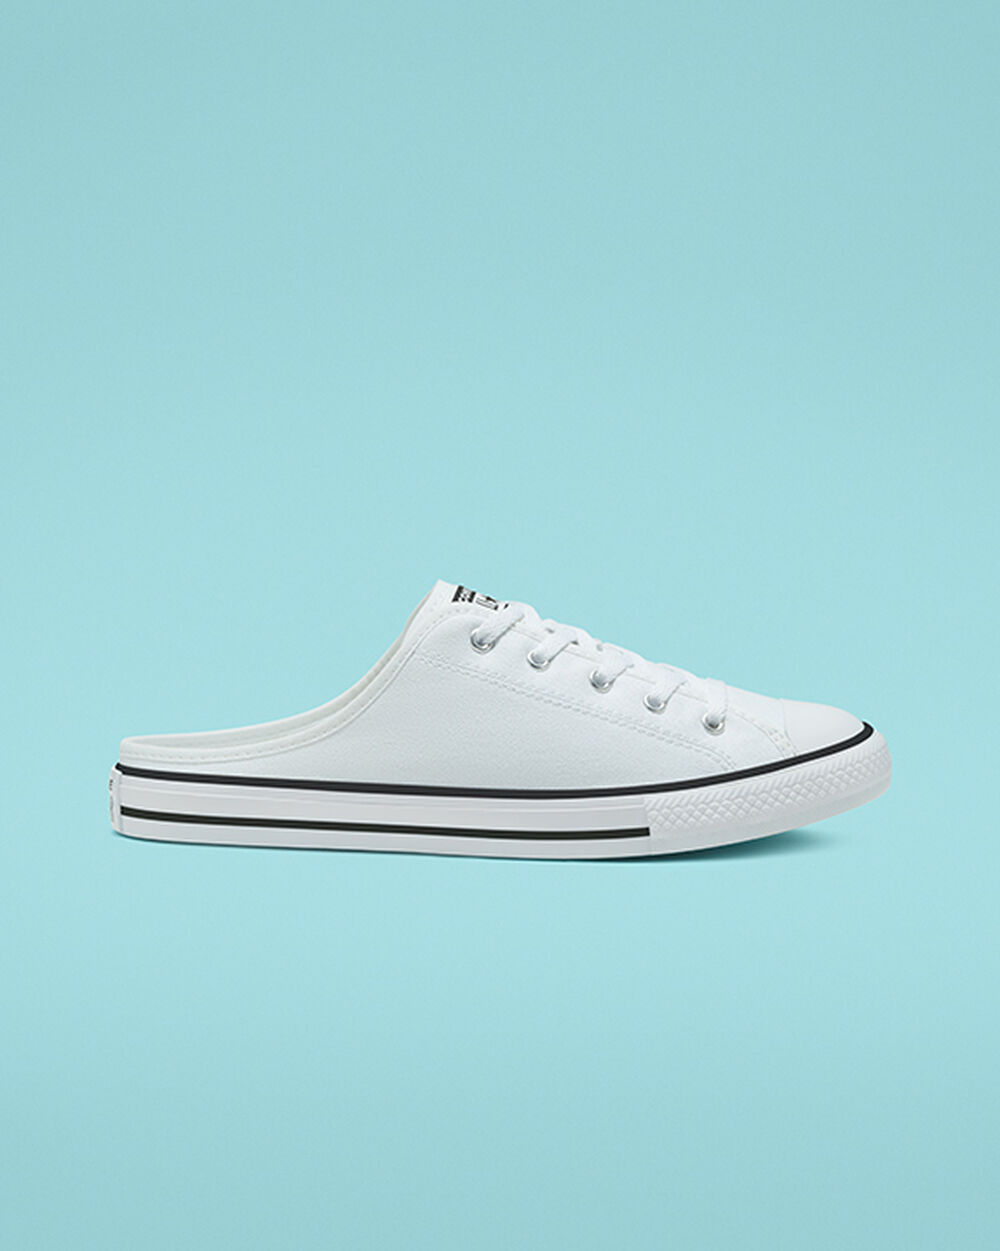 Slip On Converse Chuck Taylor All Star Mujer Blancos Negros | Mexico-806266